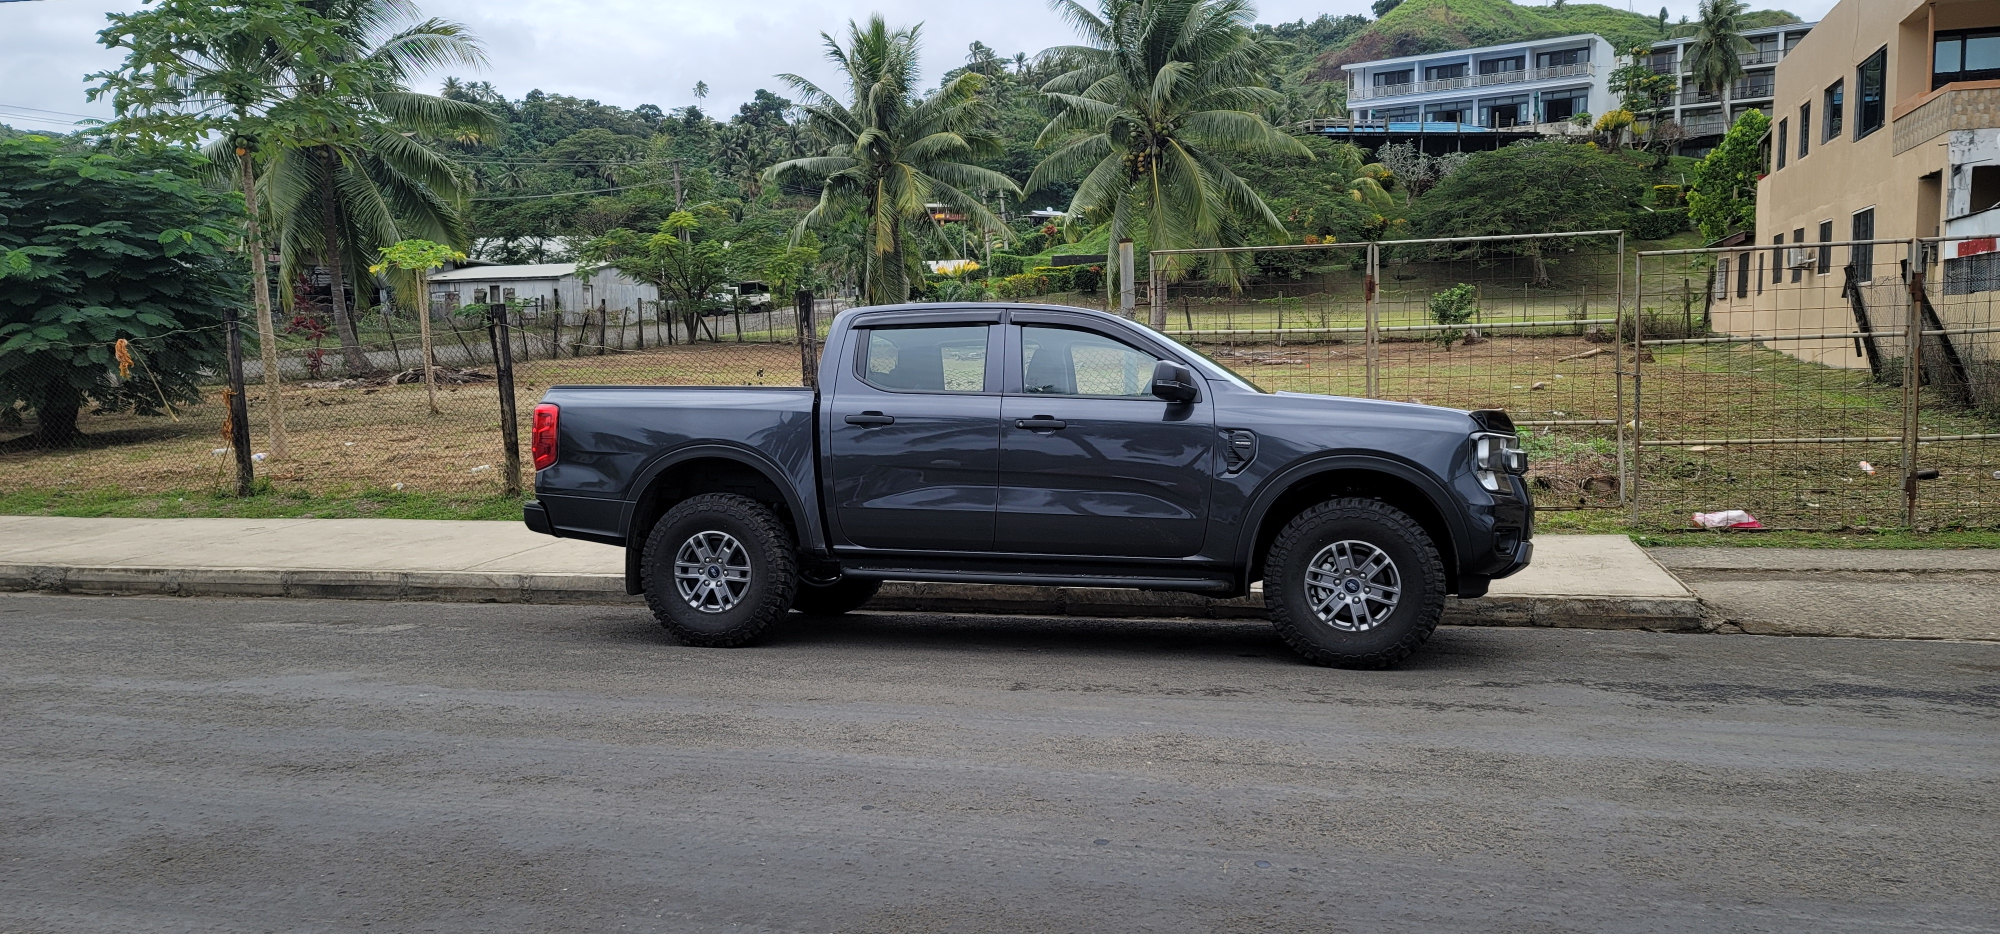 Ford Ranger Just returned from Fiji...6G Ranger already on the road (saw the new Raptor as well). 20230712_101345